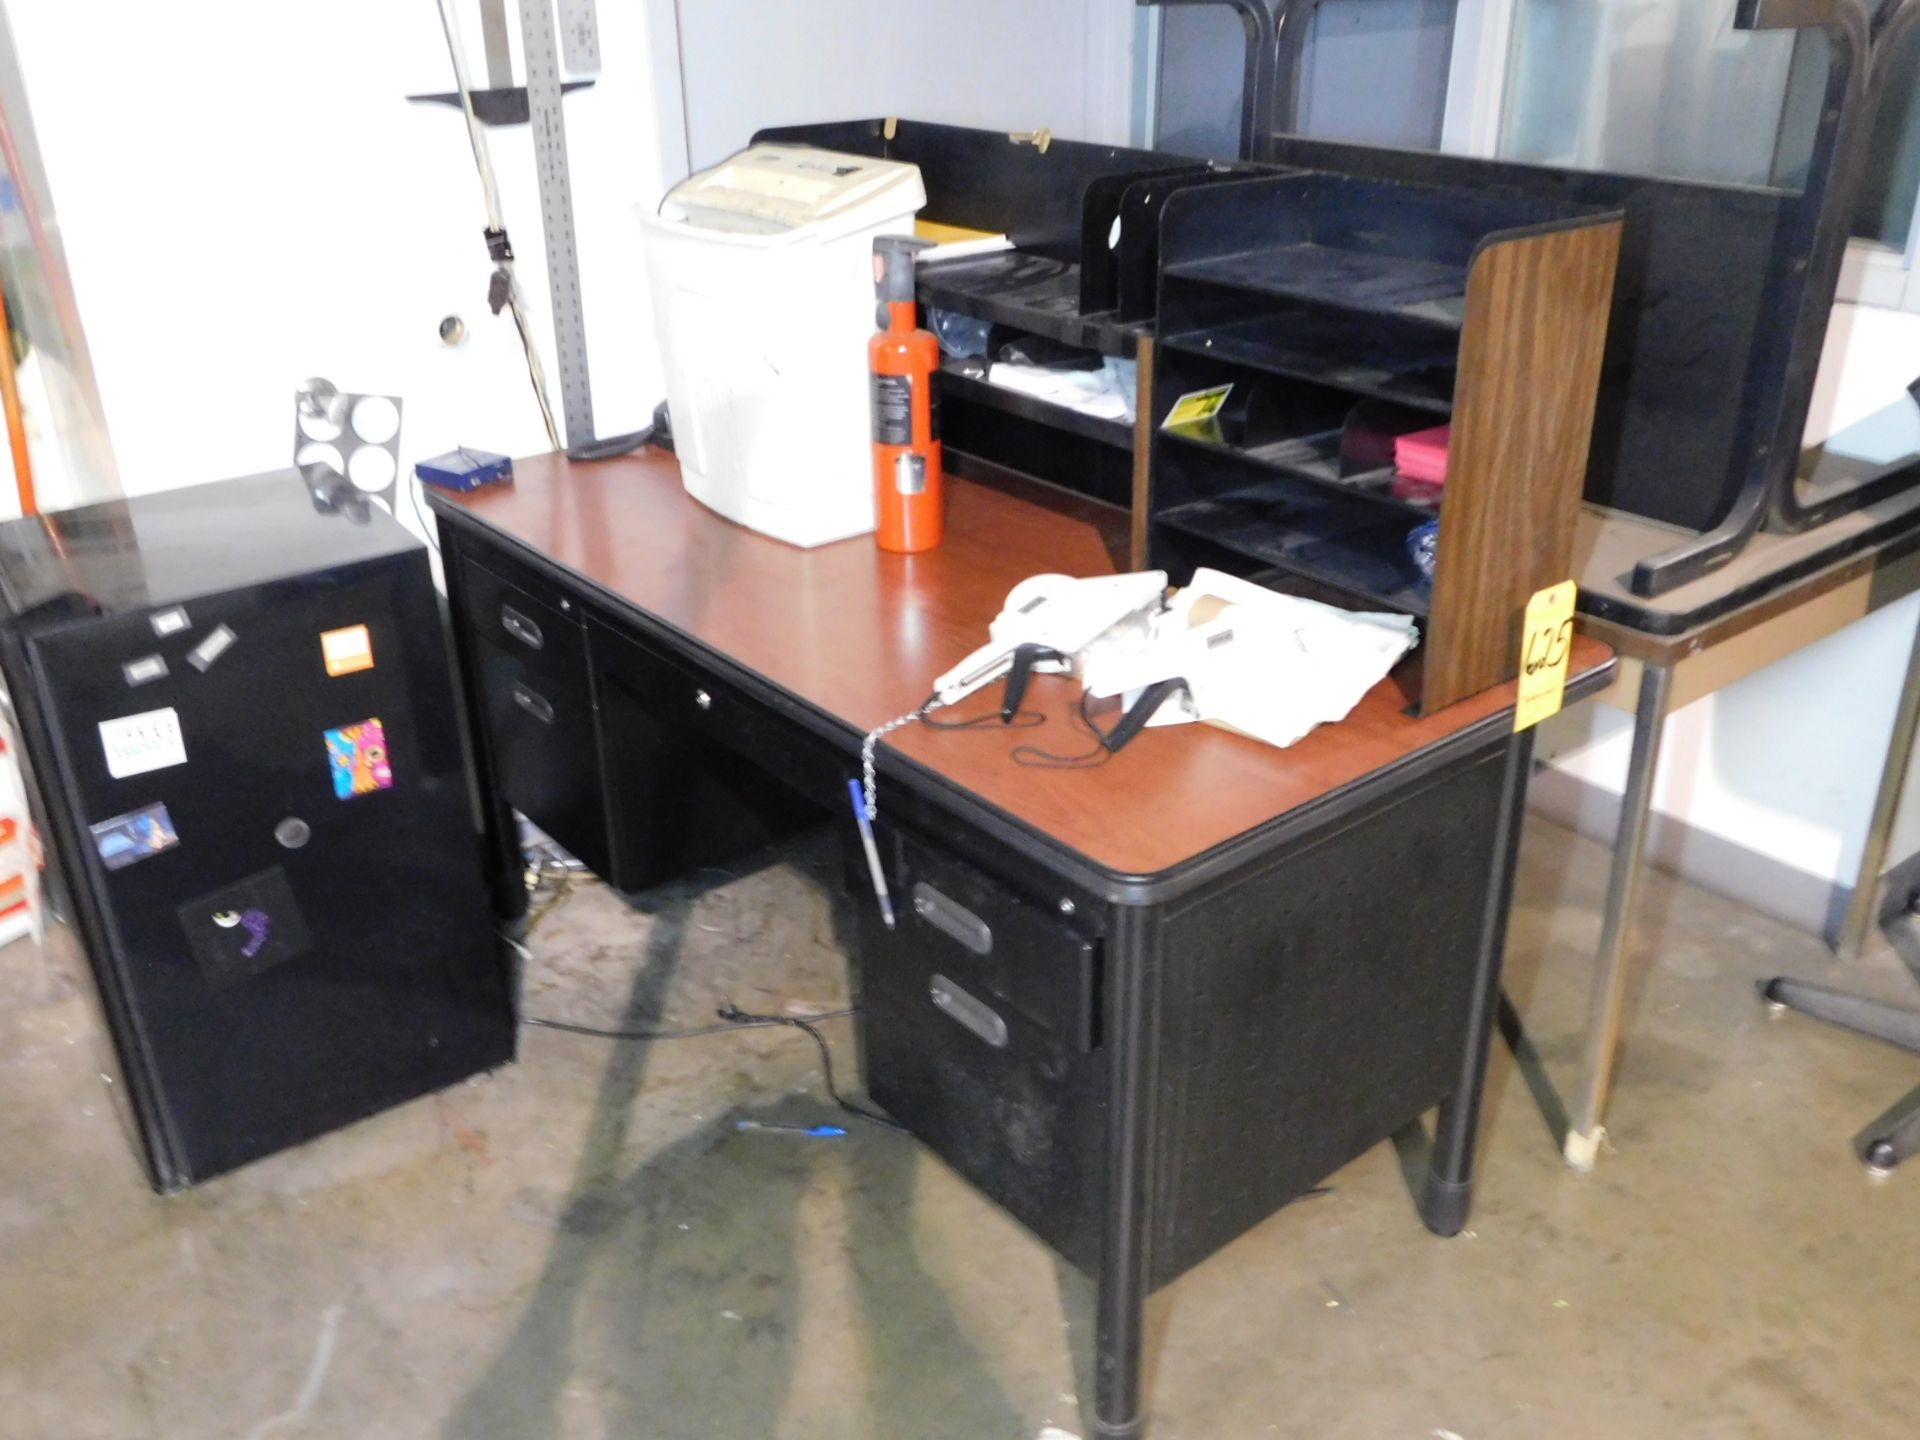 Refrigerator, Desk, and (2) Tables